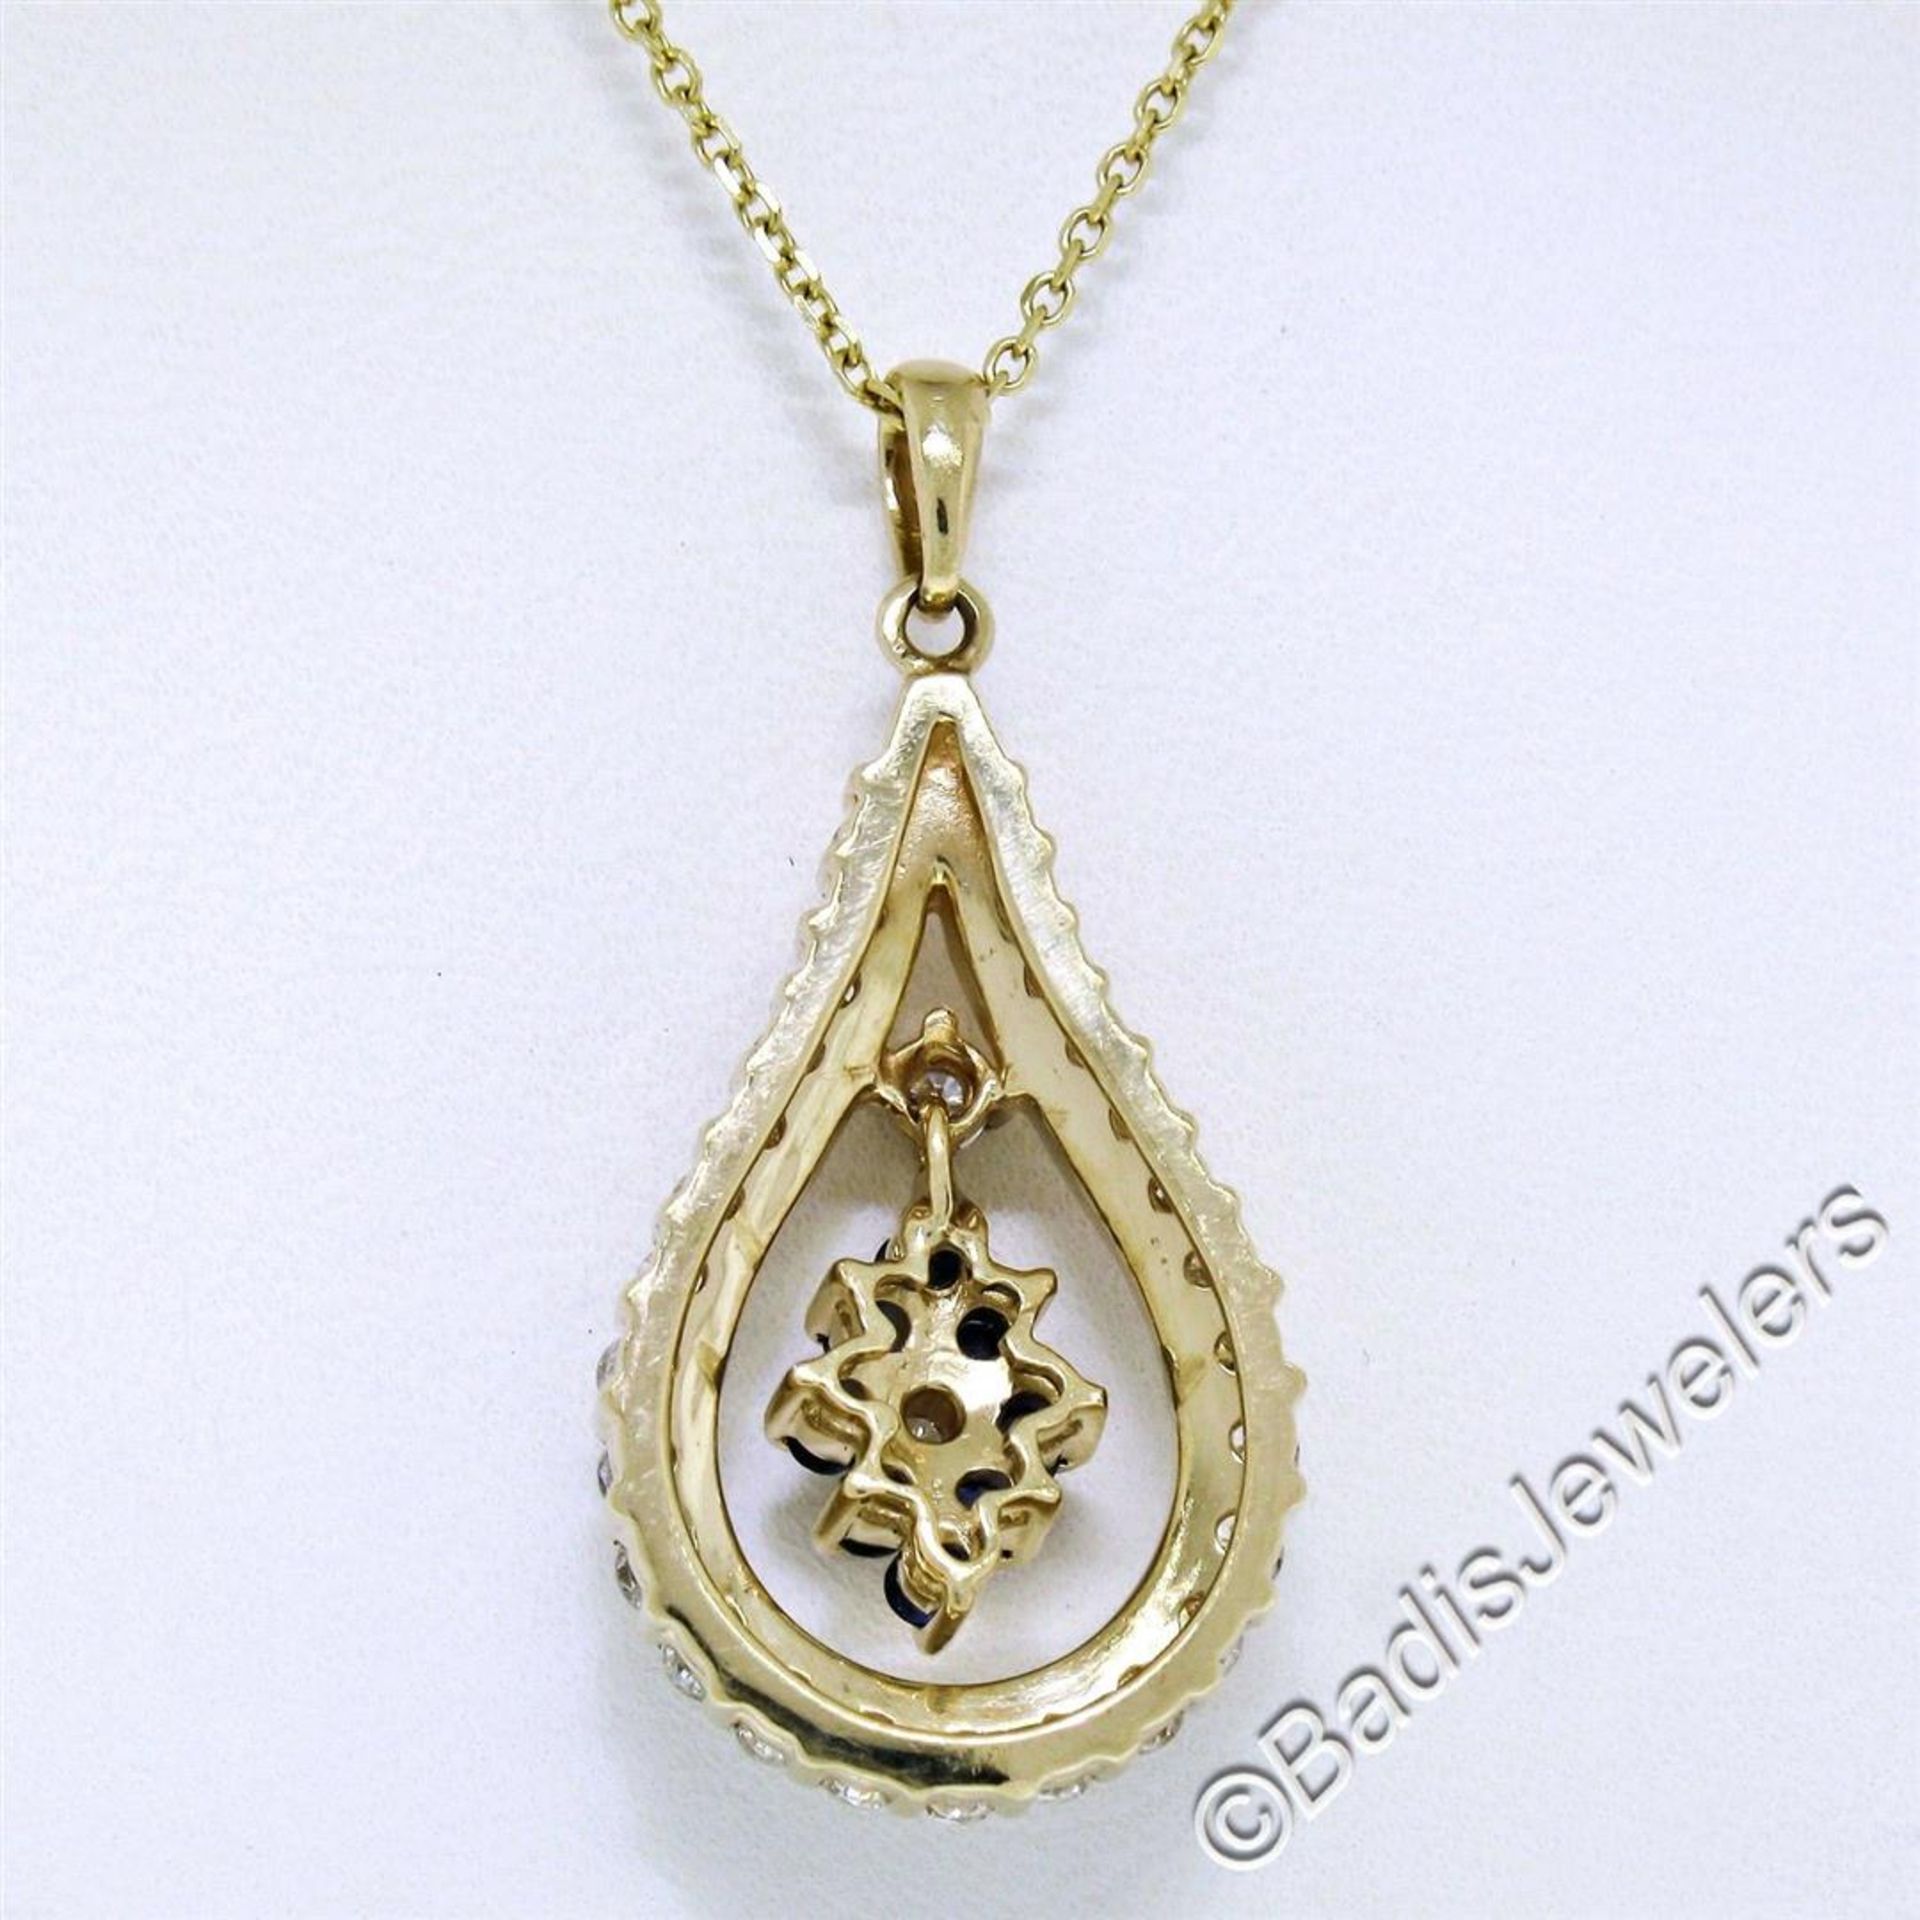 14kt Yellow Gold 1.22ctw Diamond and Sapphire Tear Drop Dangle Pendant Necklace - Image 6 of 7